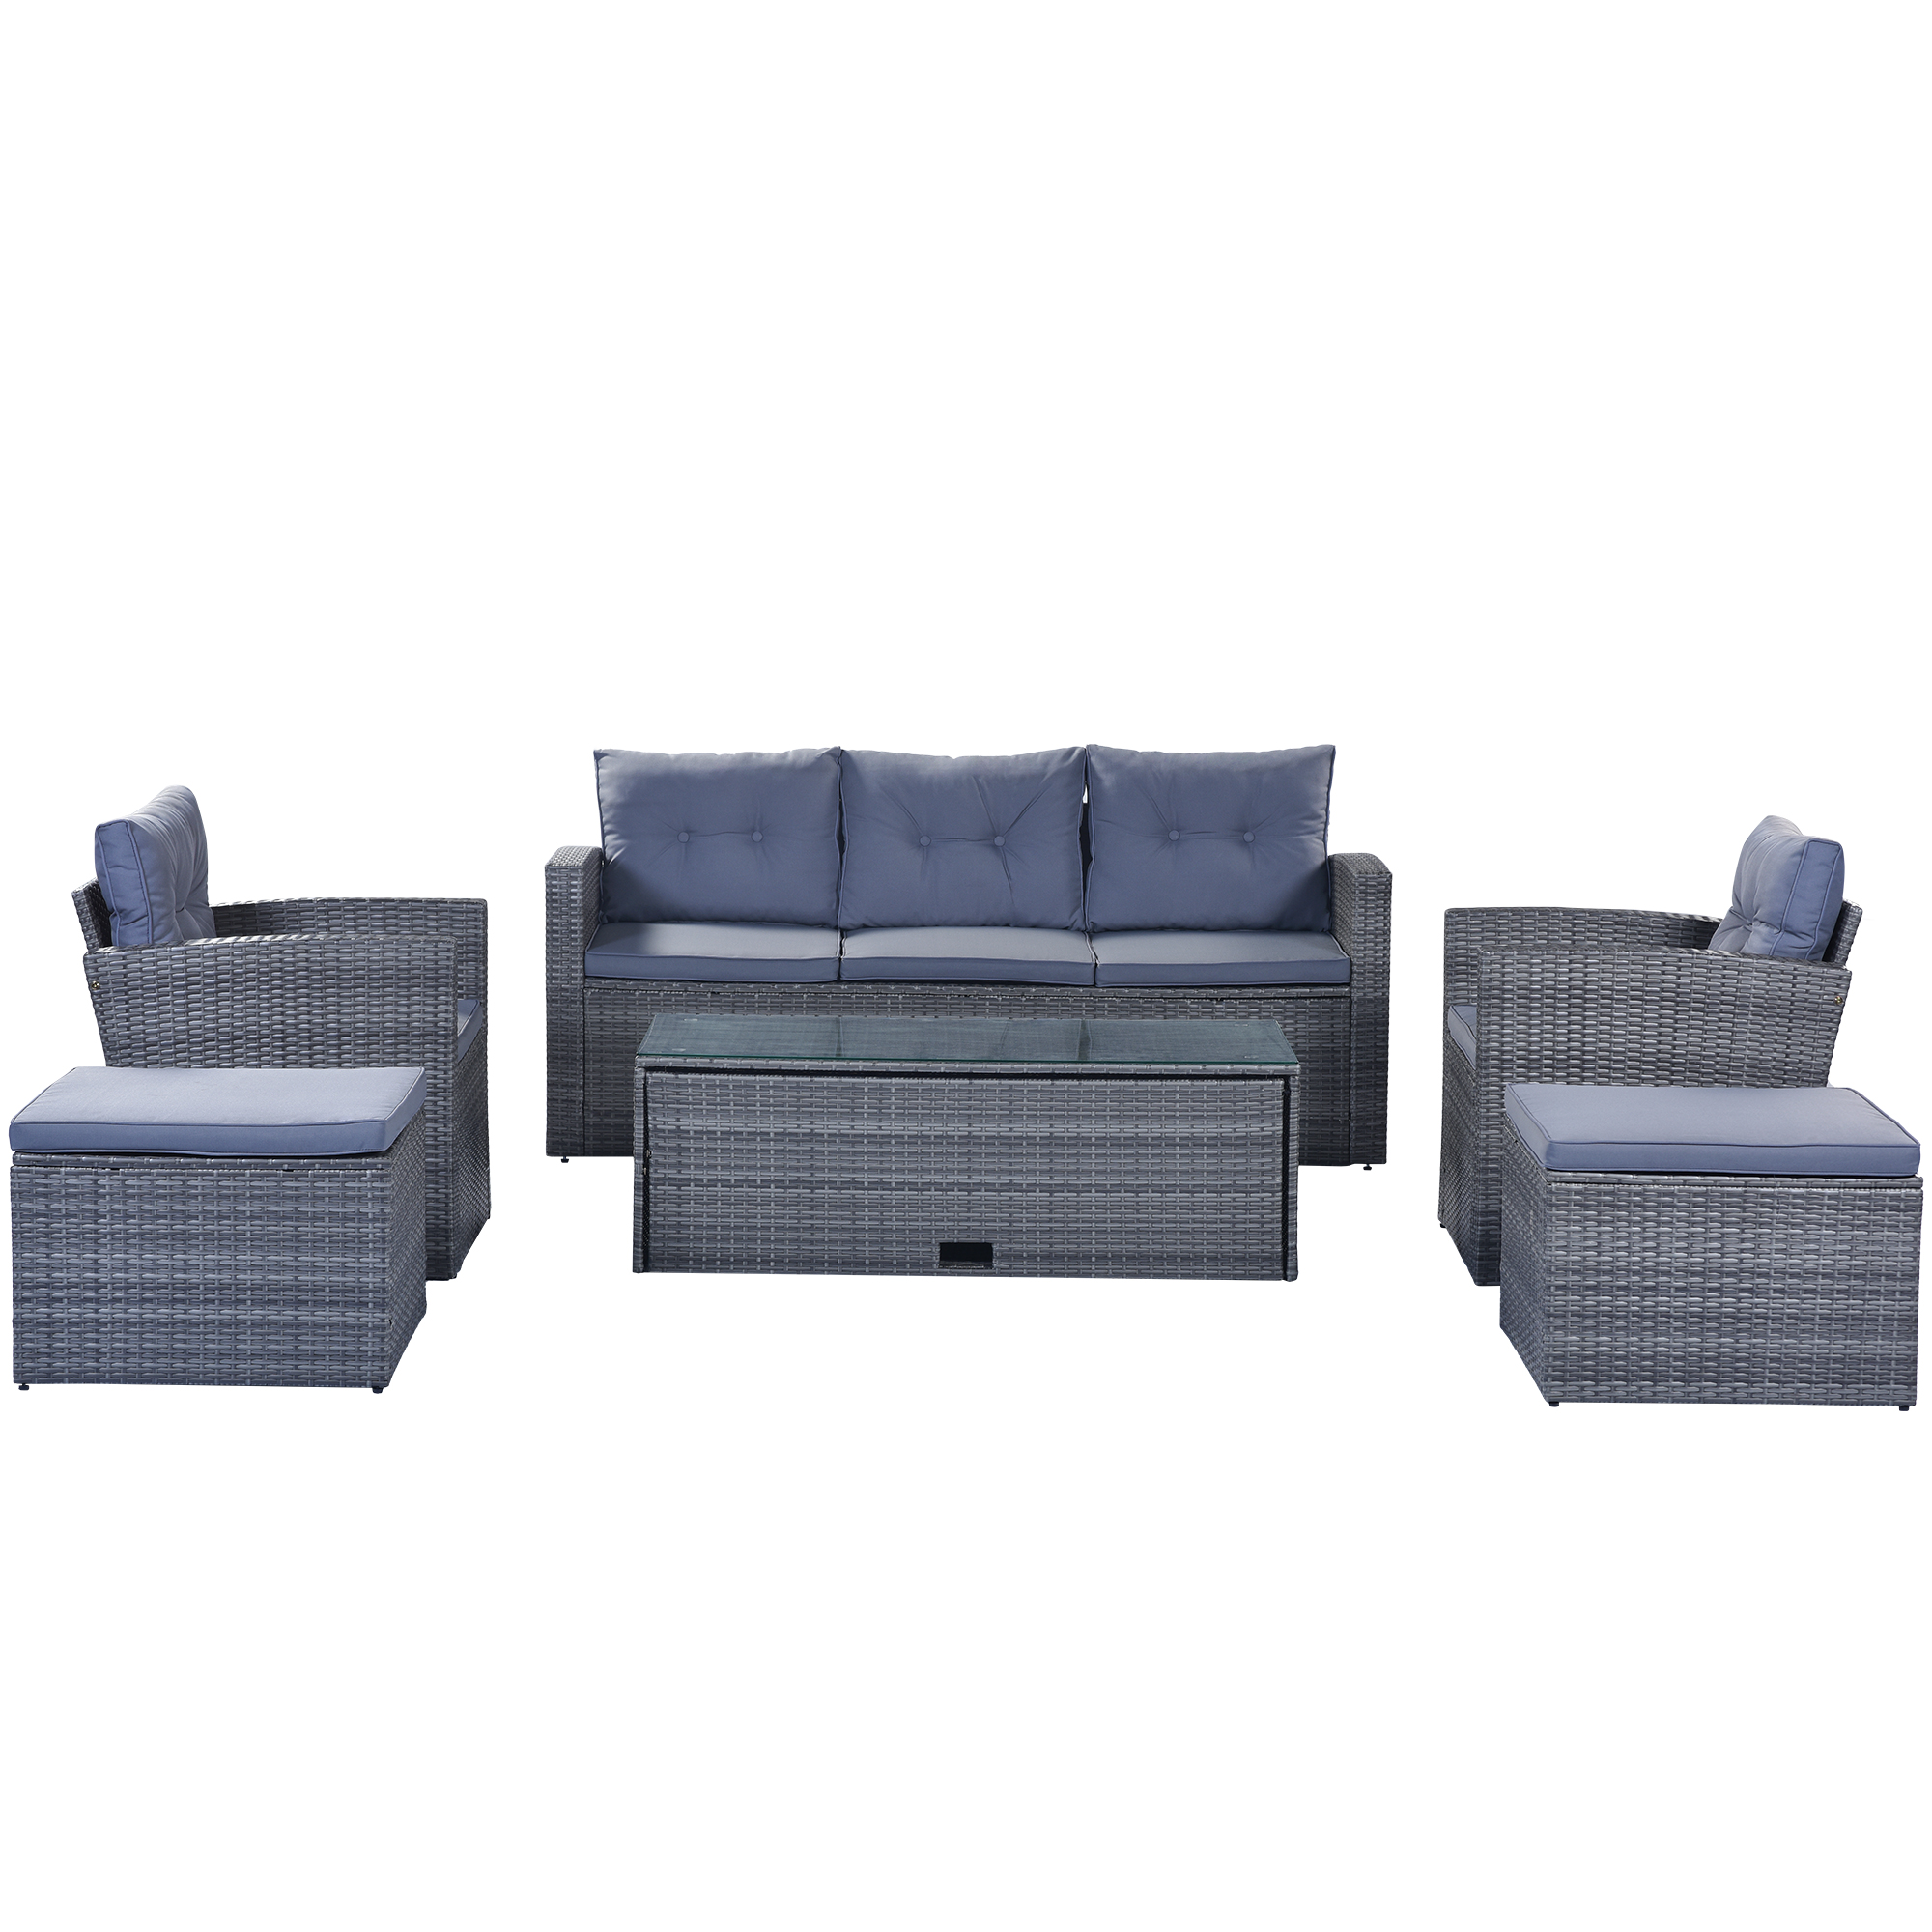 Mondawe 6-piece All-Weather Wicker PE rattan Patio Outdoor Dining Conversation Sectional Set with coffee table, wicker sofas, ottomans, removable cushions-Mondawe